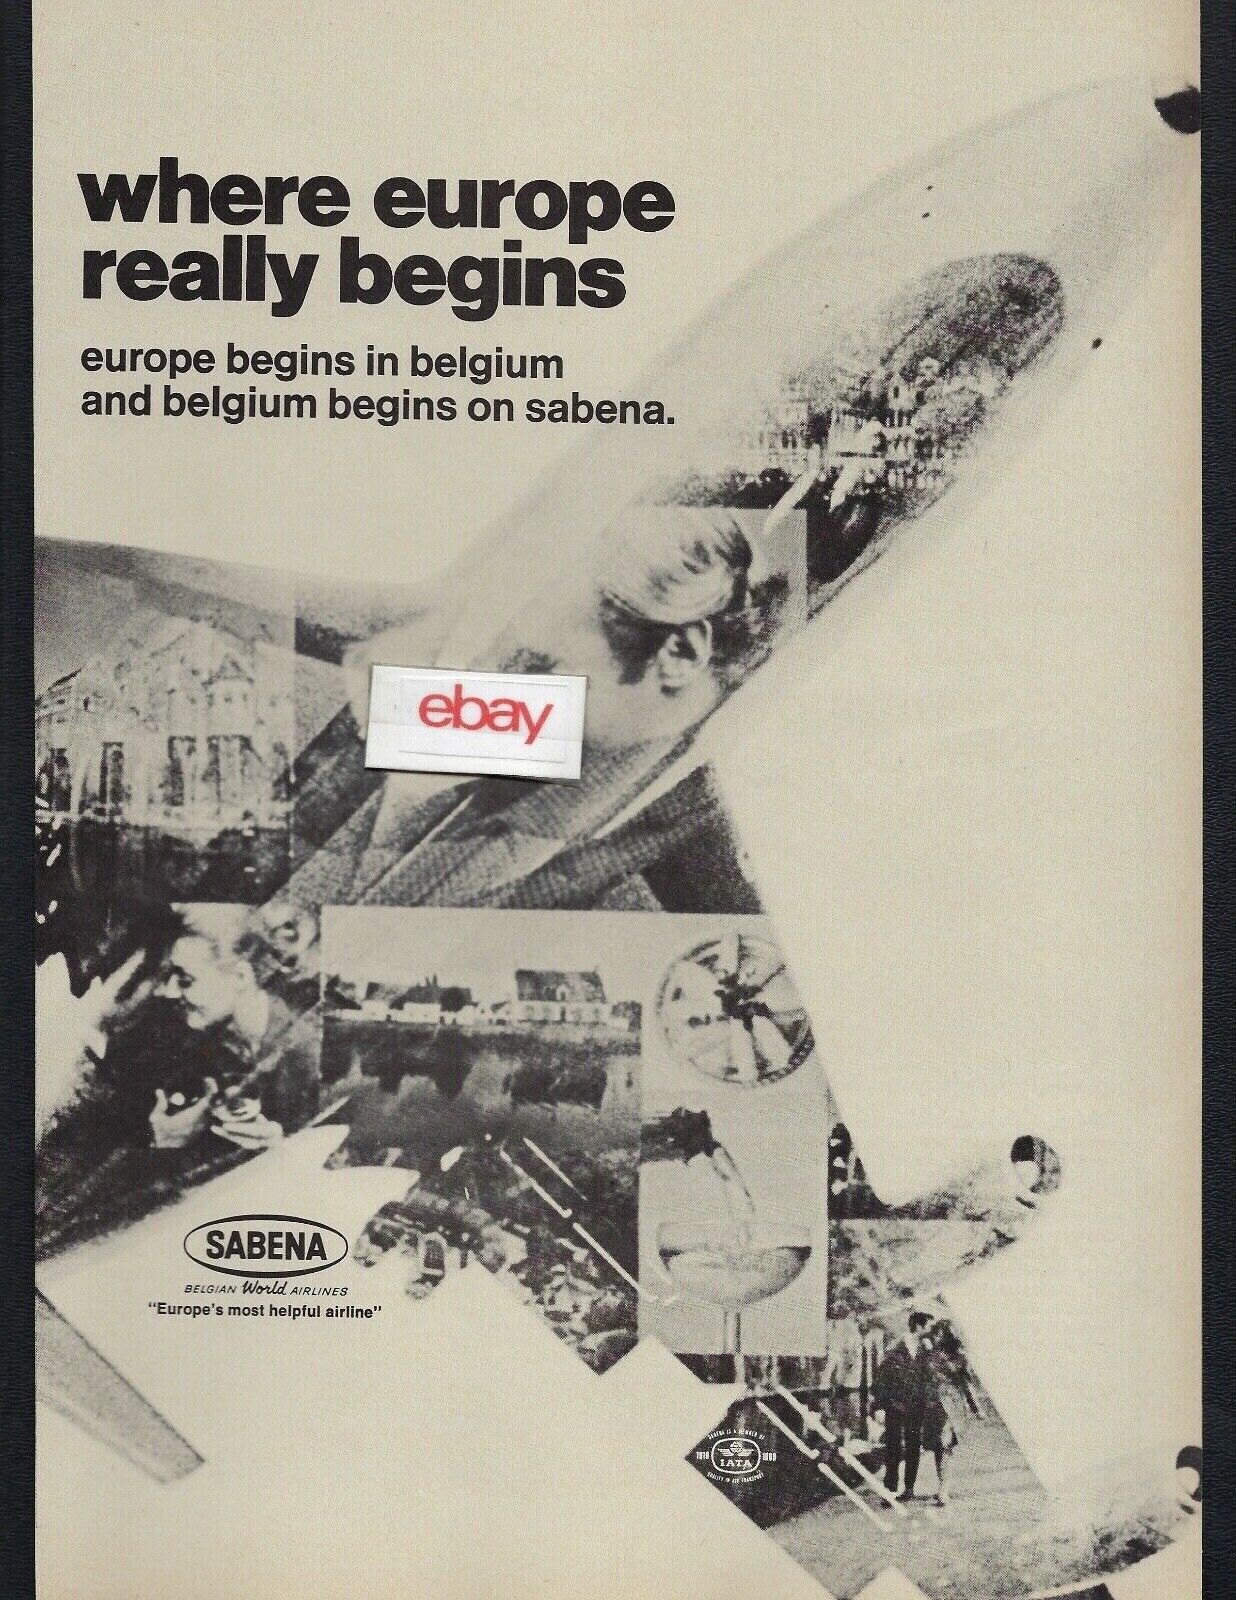 SABENA BELGIAN WORLD AIRLINES 707 JETS 1969 WHERE EUROPE REALLY BEGINS AD